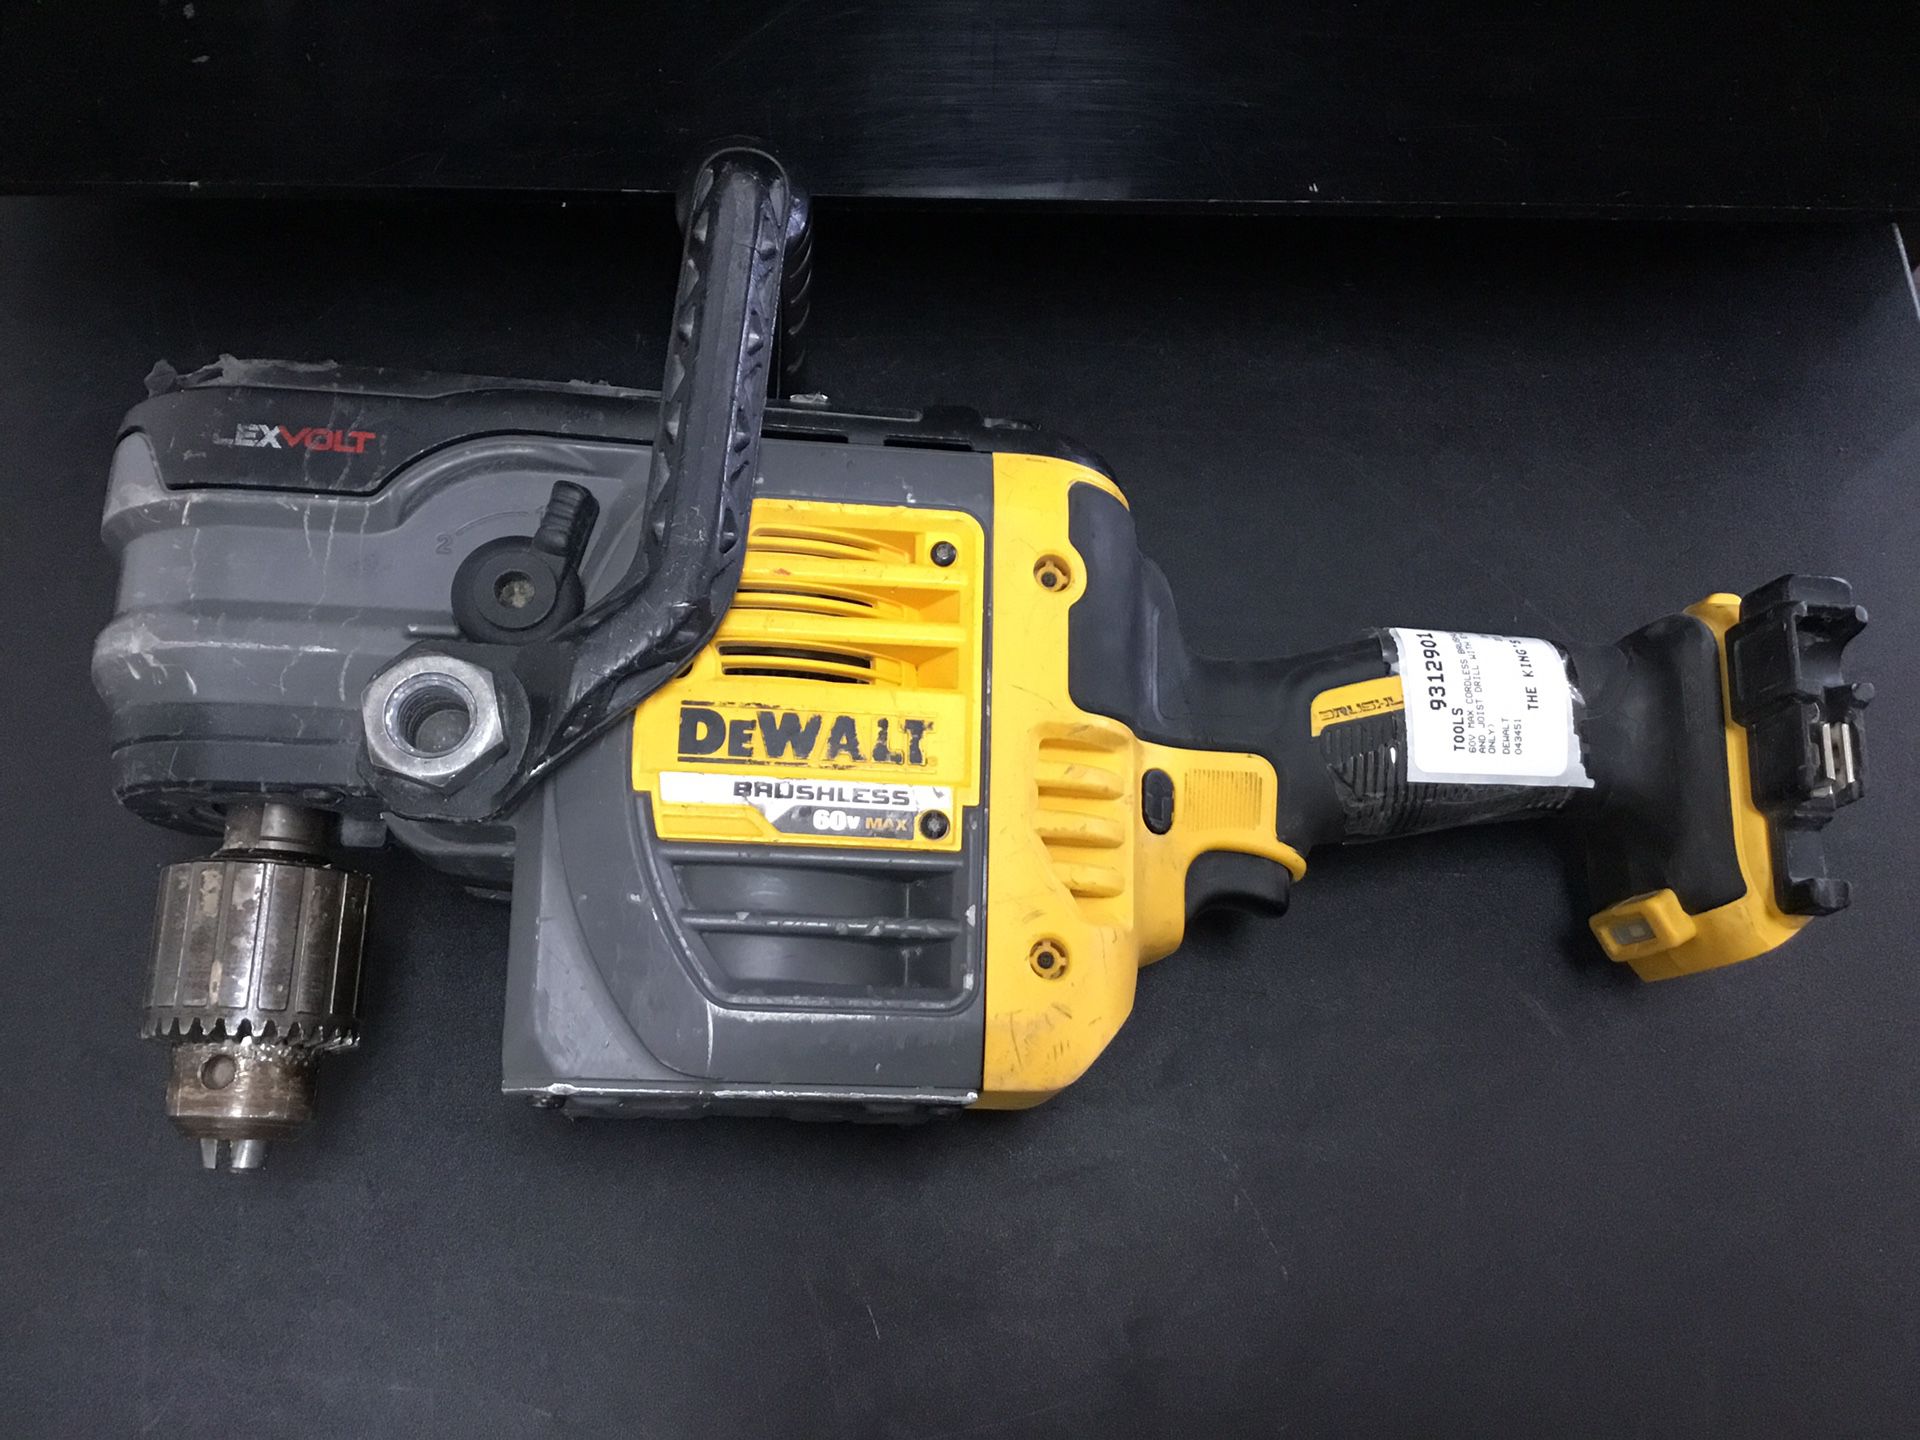 DEWALT DCD460 CORDLESS BRUSHLESS 1/2 IN. AND JOIST DRILL for Sale in Escondido, CA - OfferUp